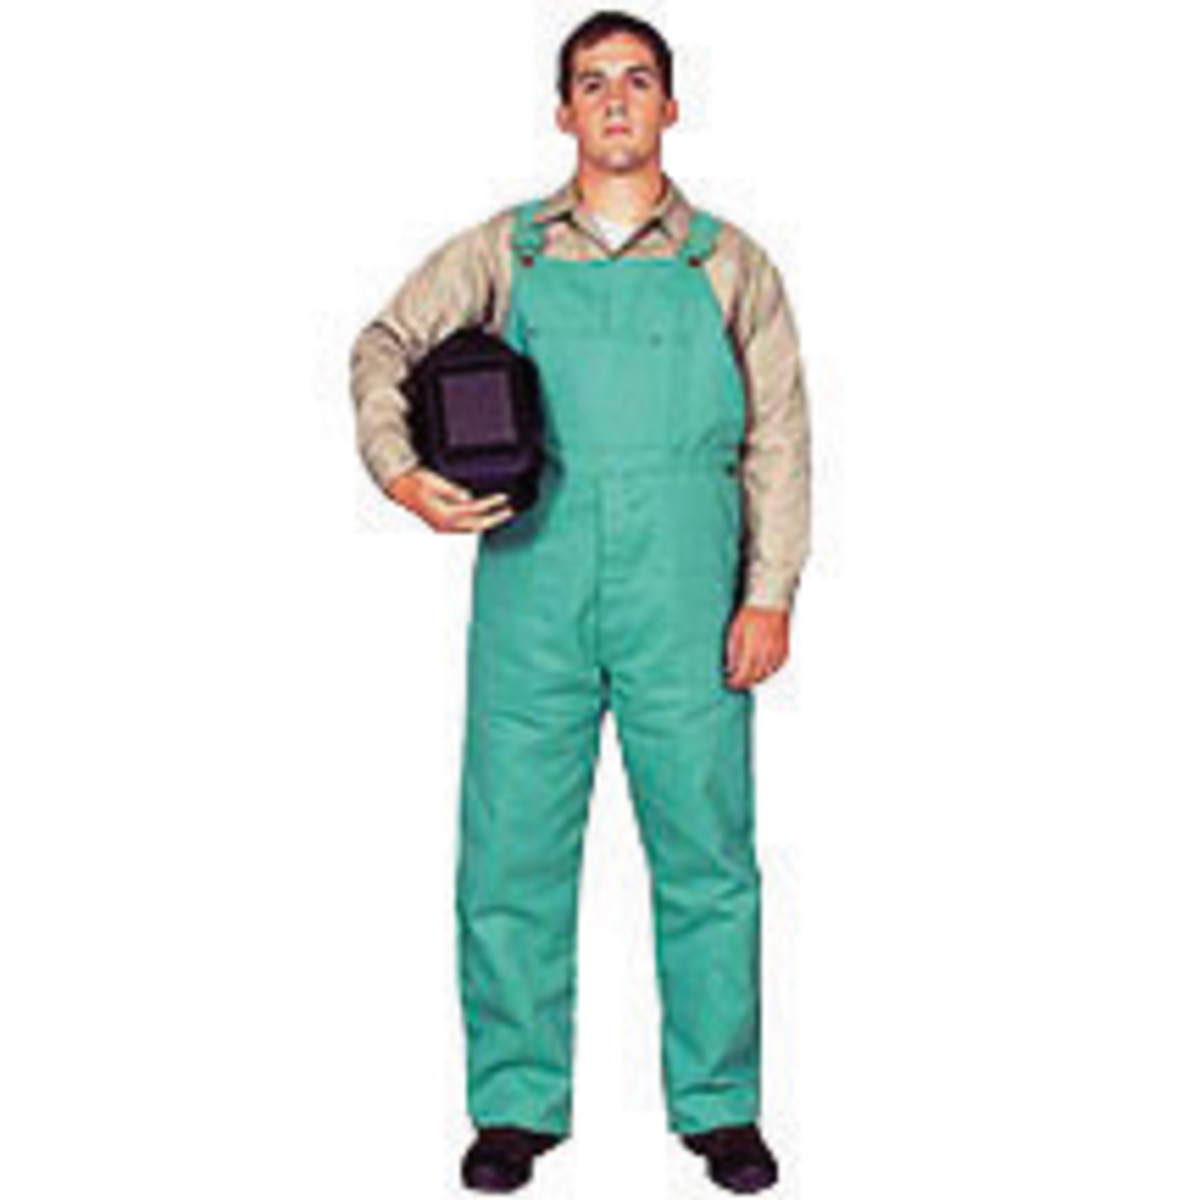 Stanco Safety Products™ Large Green Cotton Flame Resistant Bibs With Slide Buckle Closure